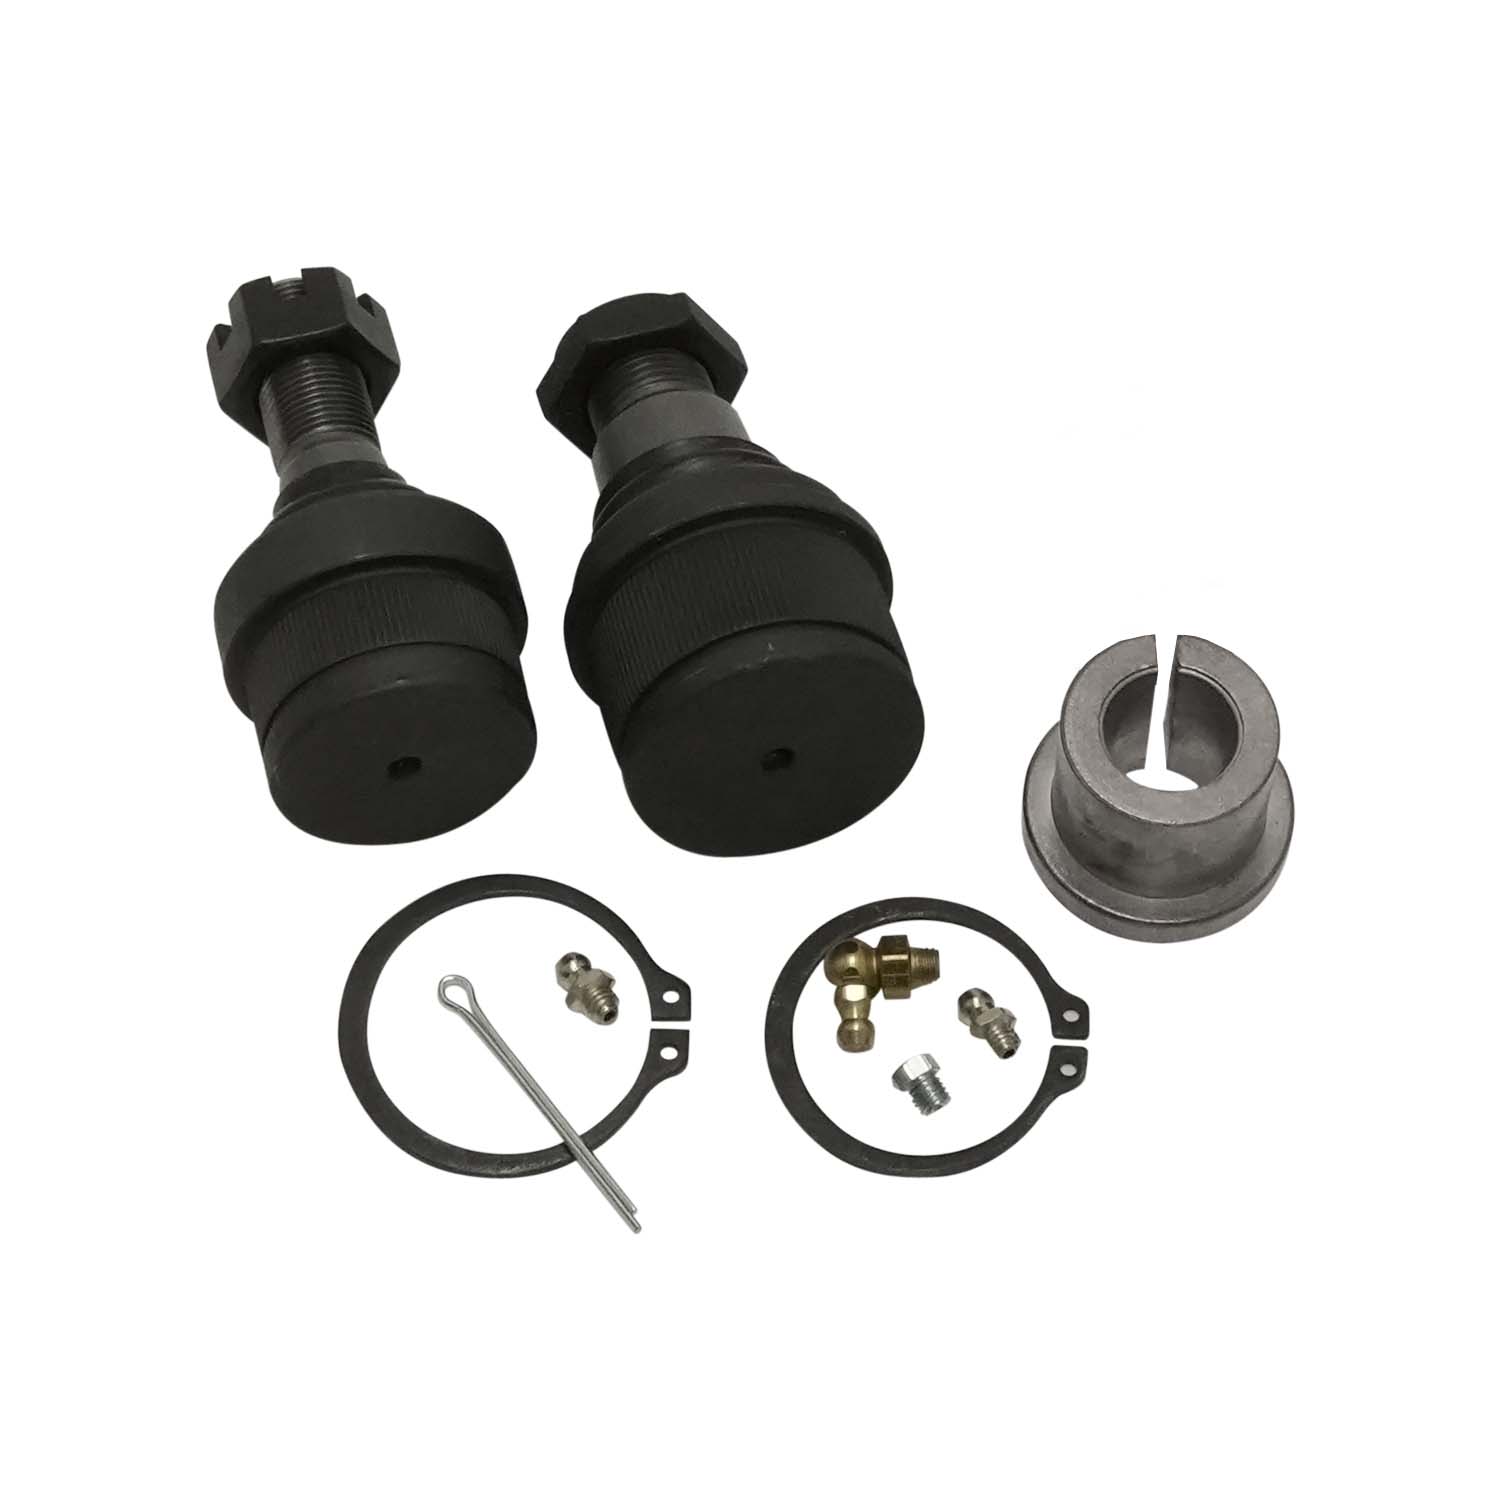 Ball Joint Kit For Dana 50/Dana 60 Front Differential, One Side W/Bushing